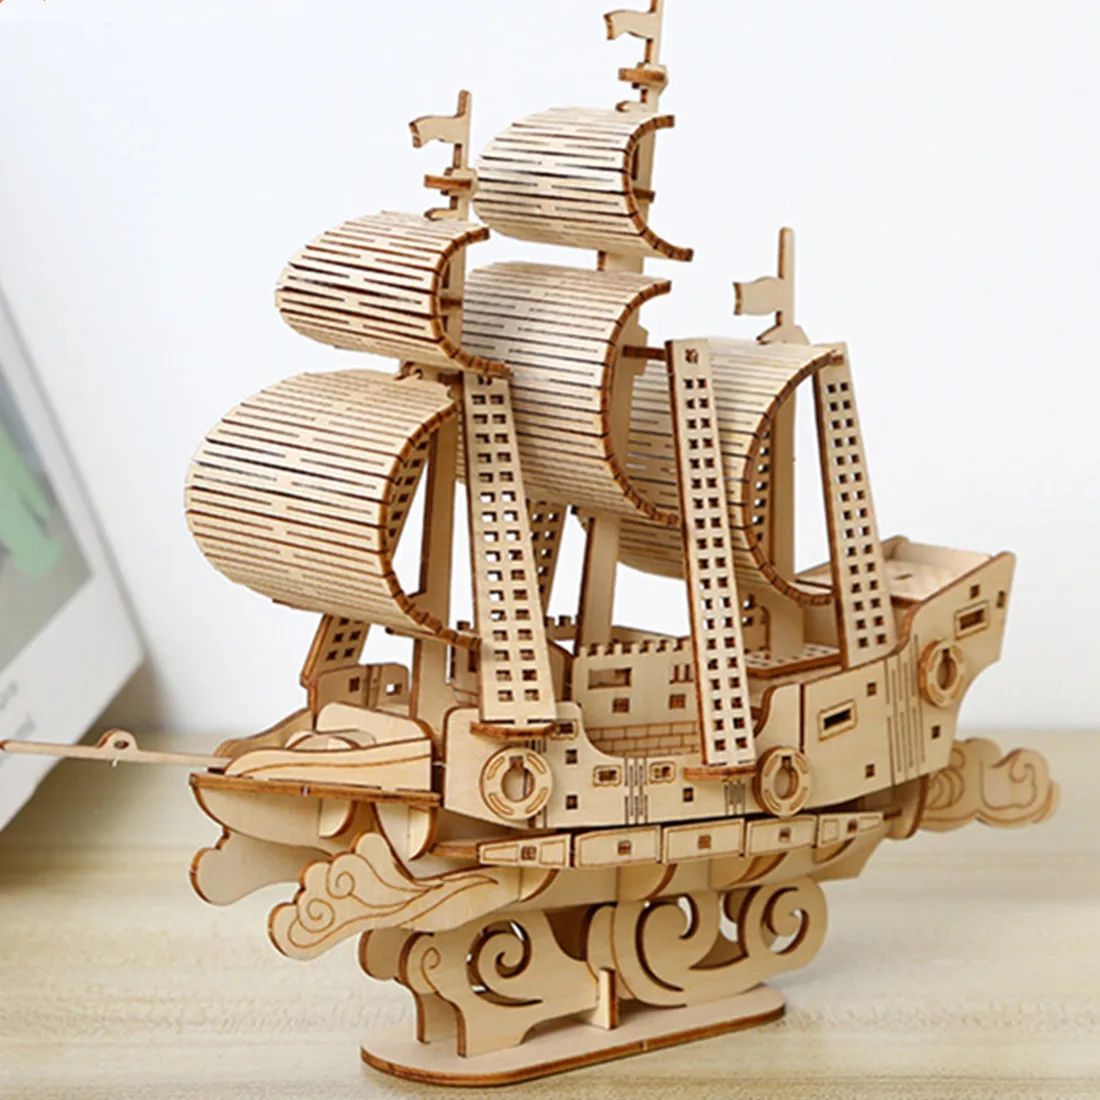 3D Puzzles Wooden Ocean Sailing Model Handmade Boat Building BlockS Kits DIY Assembly Ship Toy for Kids Adults GiftS toyan fs l400 14cc four cylinder four stroke water cooled nitro engine model assembly kit for 1 8 1 10 1 12 rc car ship model